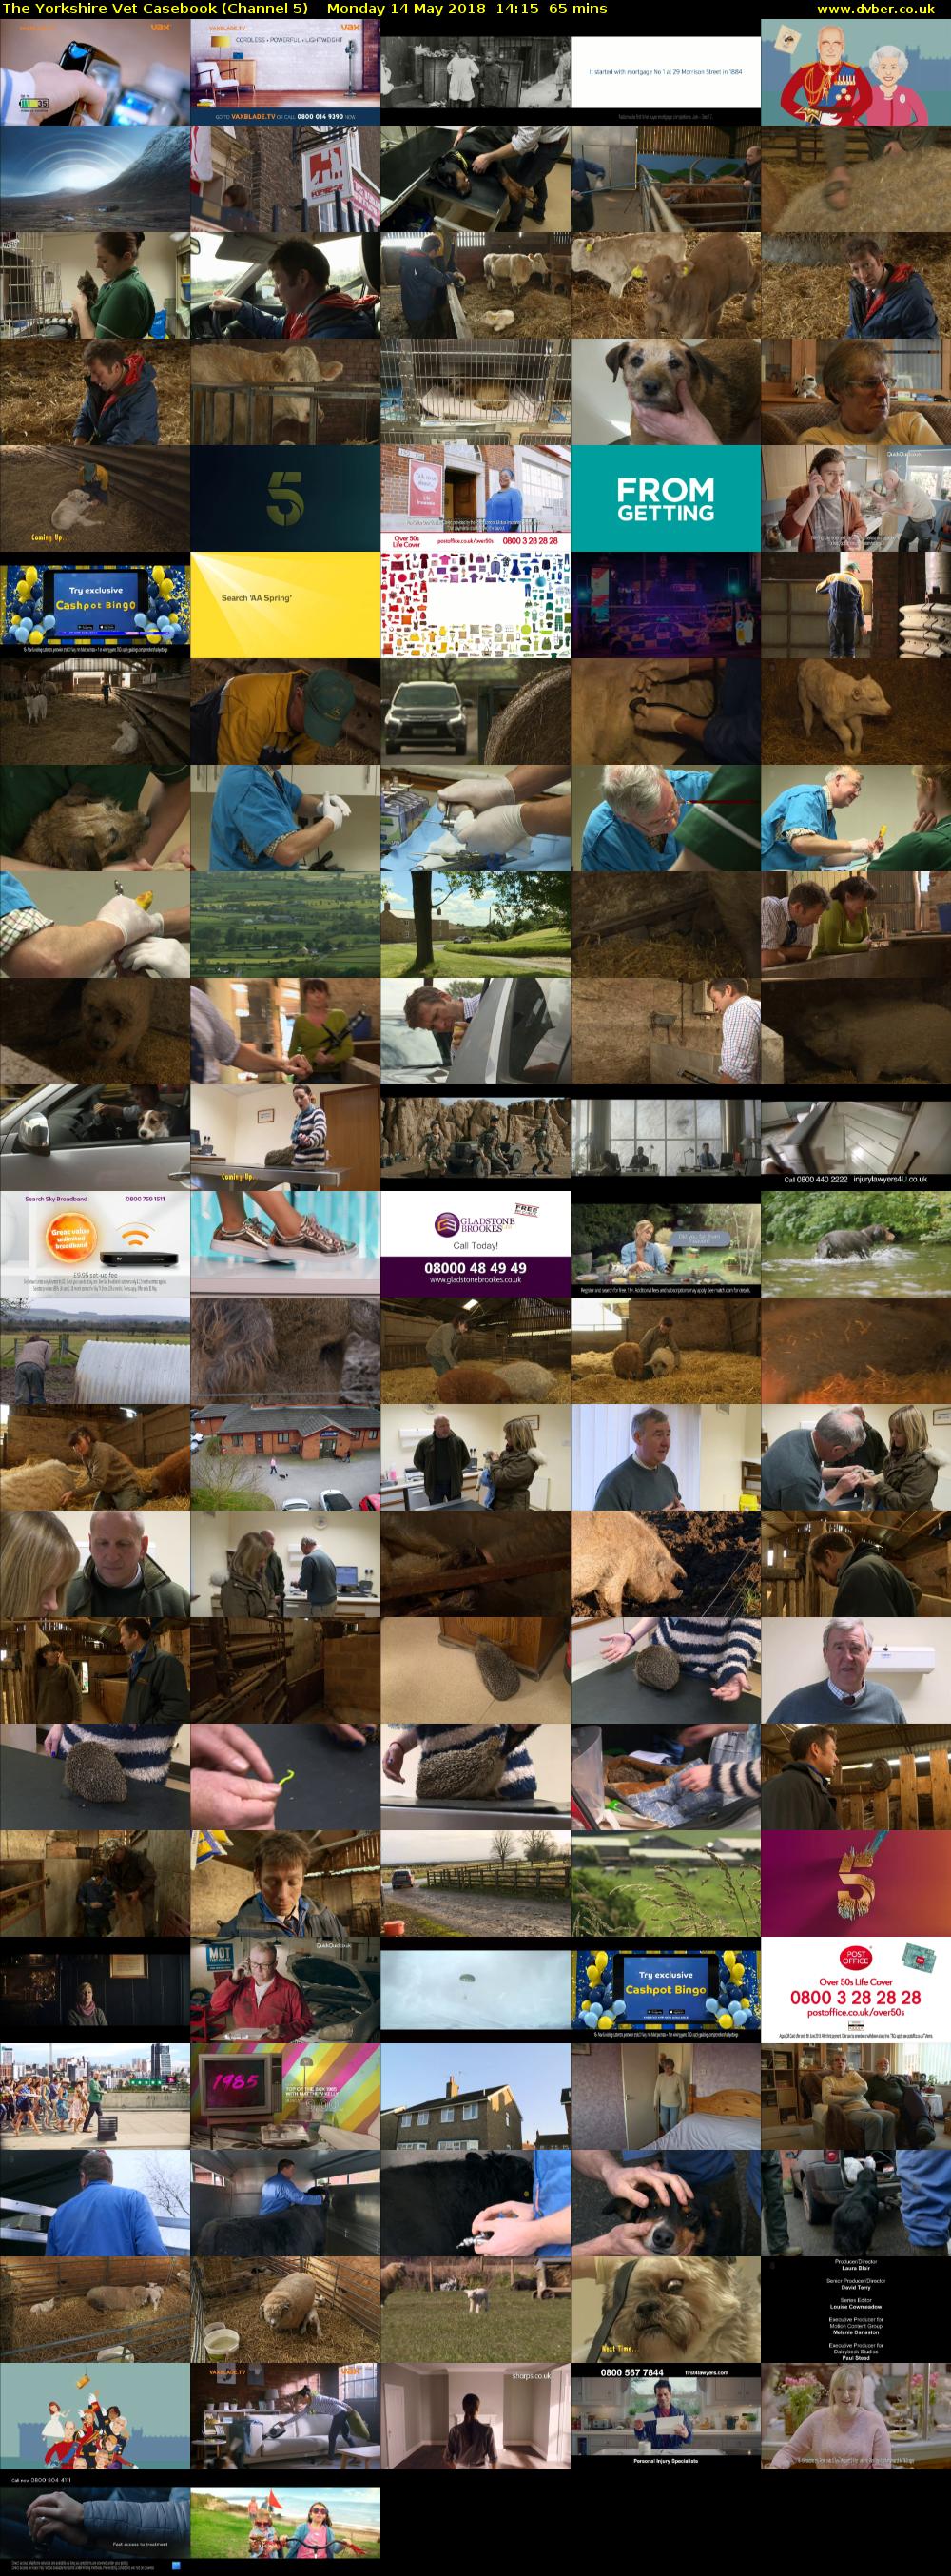 The Yorkshire Vet Casebook (Channel 5) Monday 14 May 2018 14:15 - 15:20